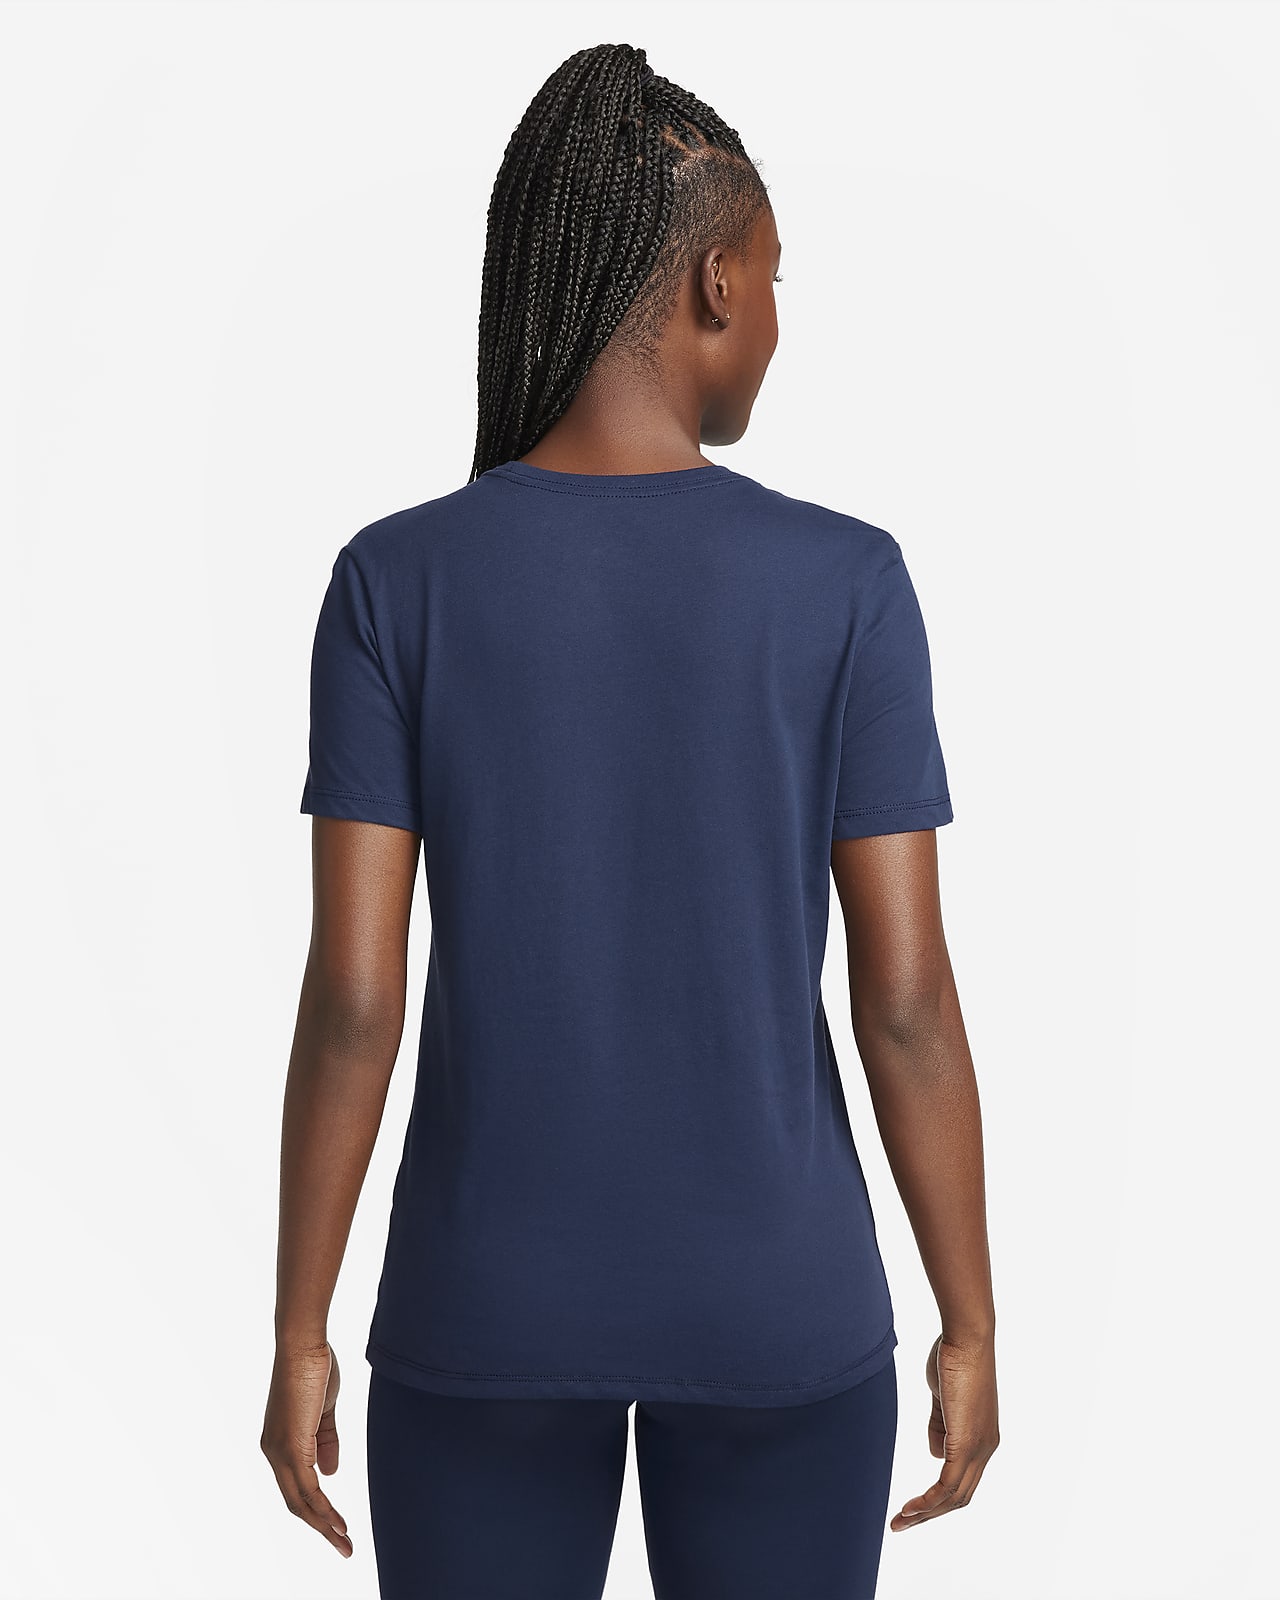  Nike Womens Dri-Fit Fitness Workout T-Shirt nk453182 419 (Small)  Navy : Clothing, Shoes & Jewelry